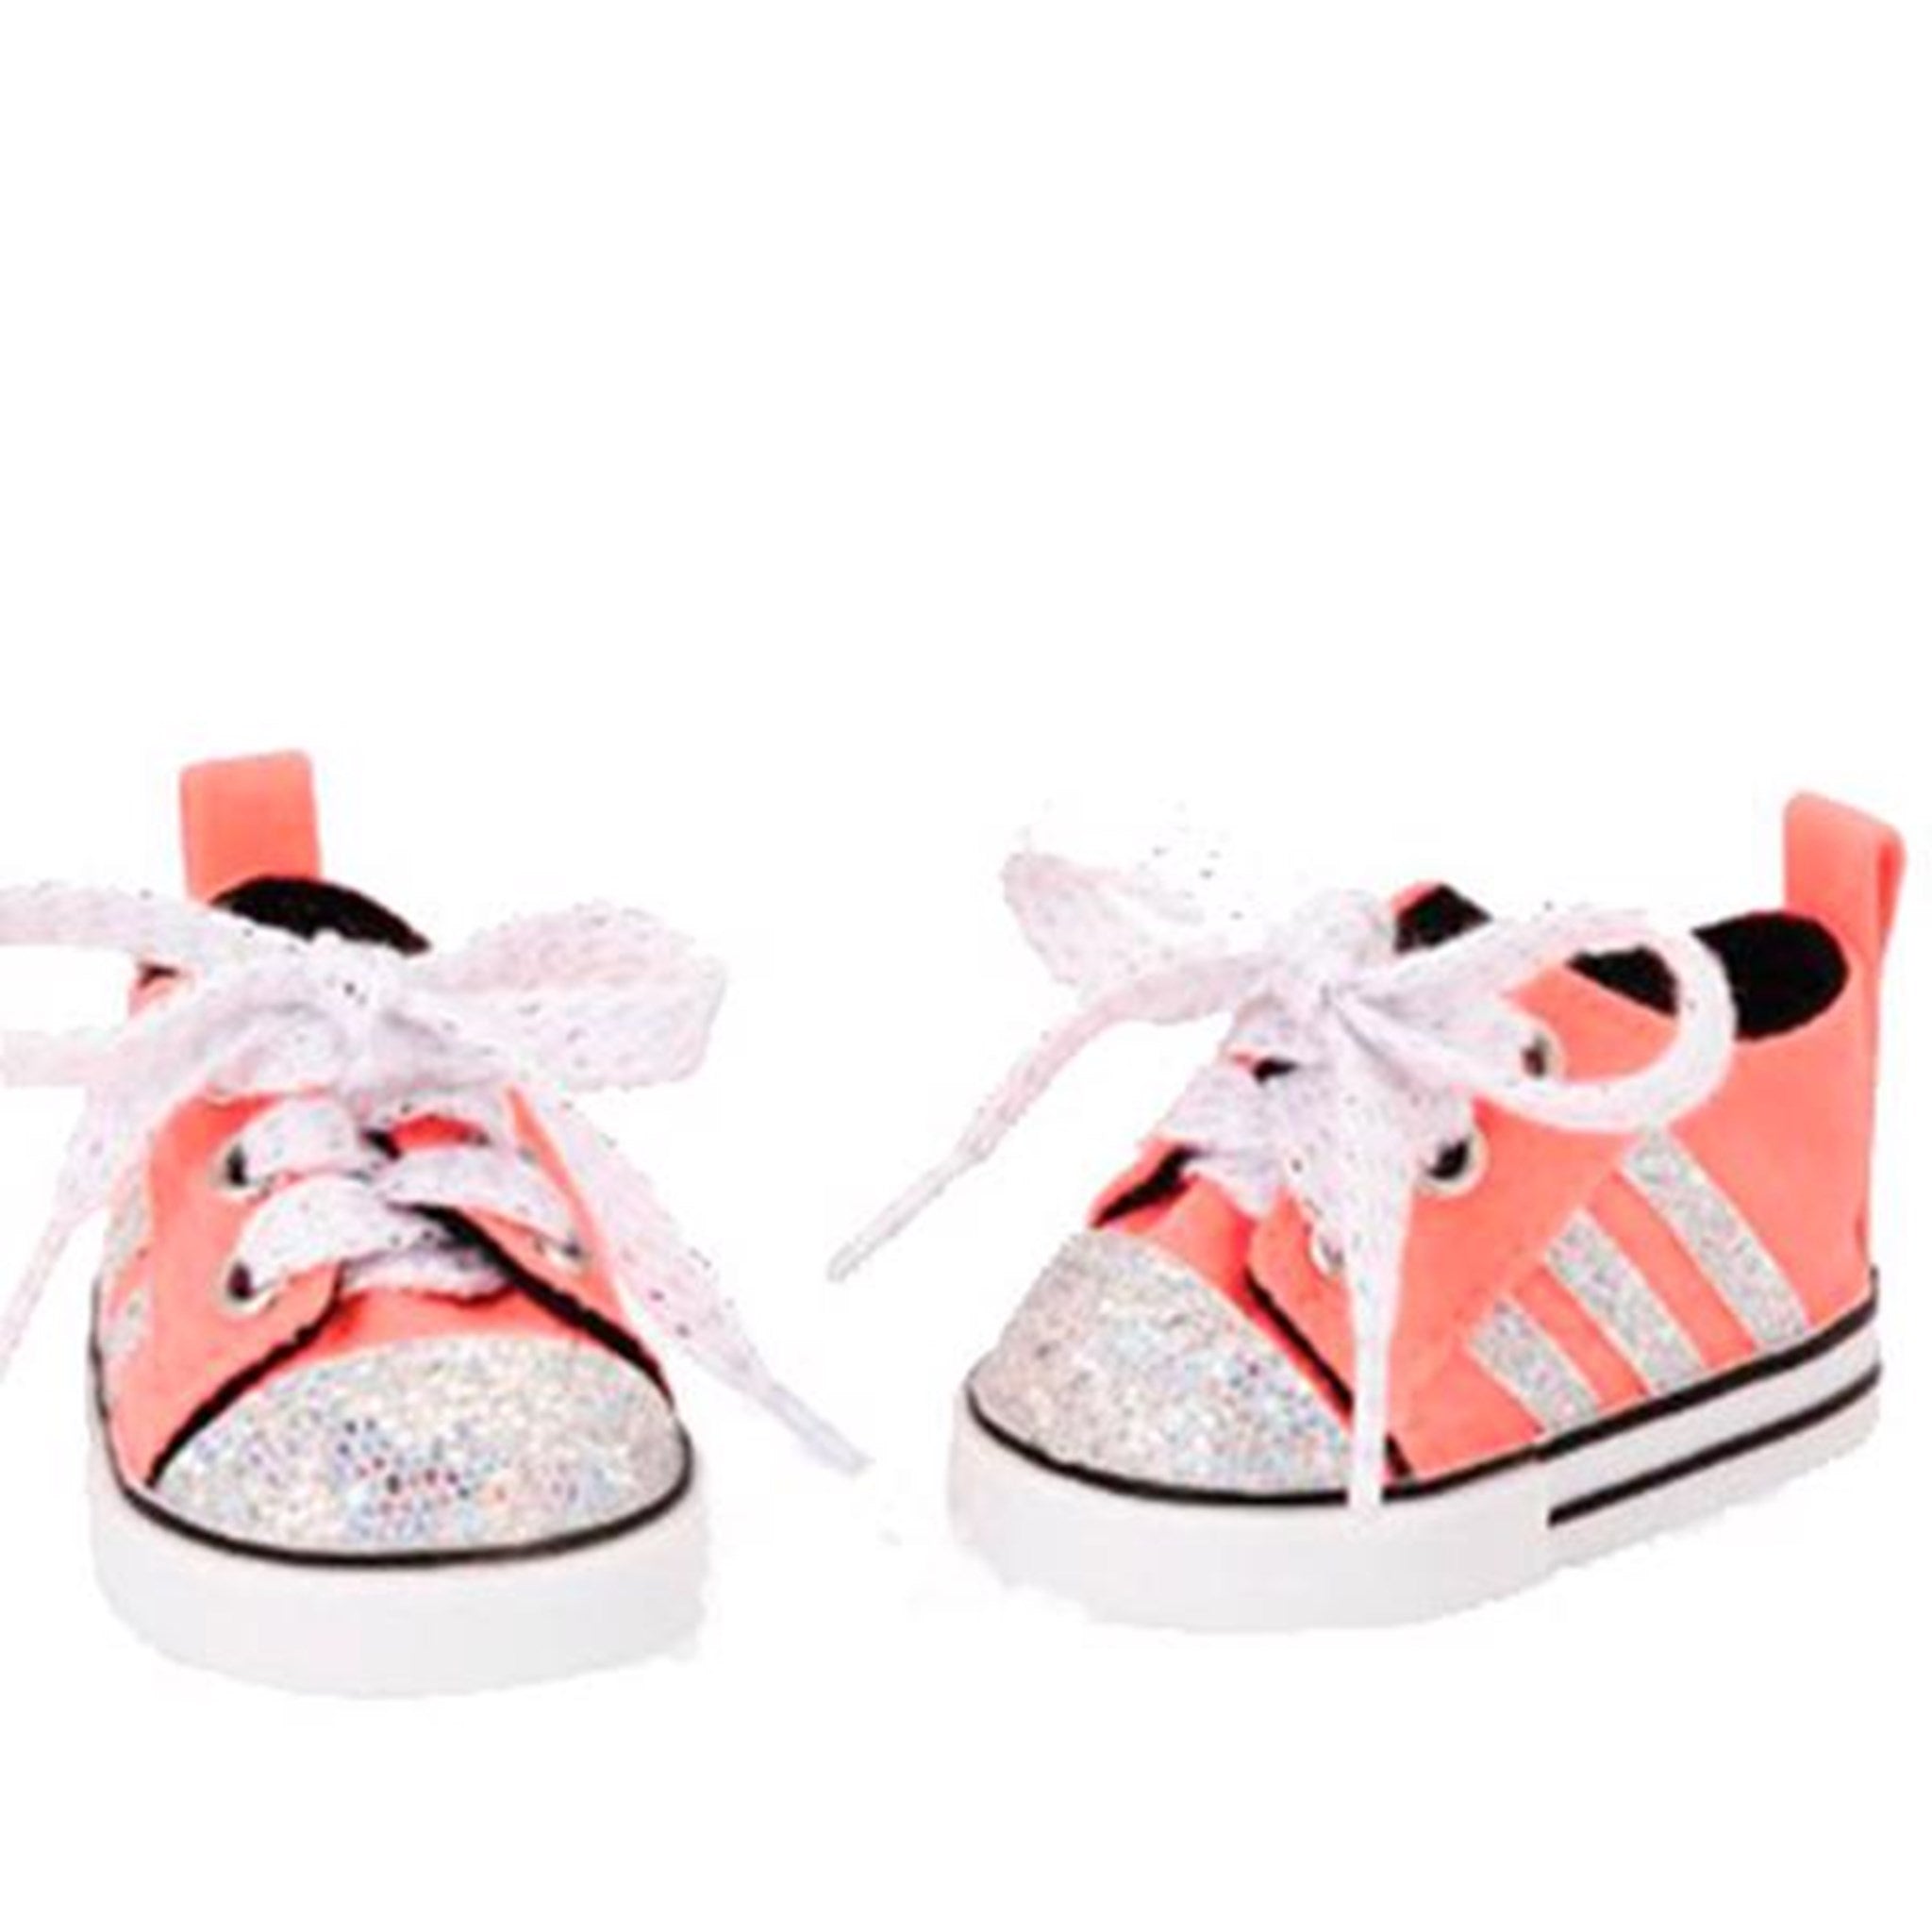 Our Generation Doll Shoes - Sneakers w. Glitter